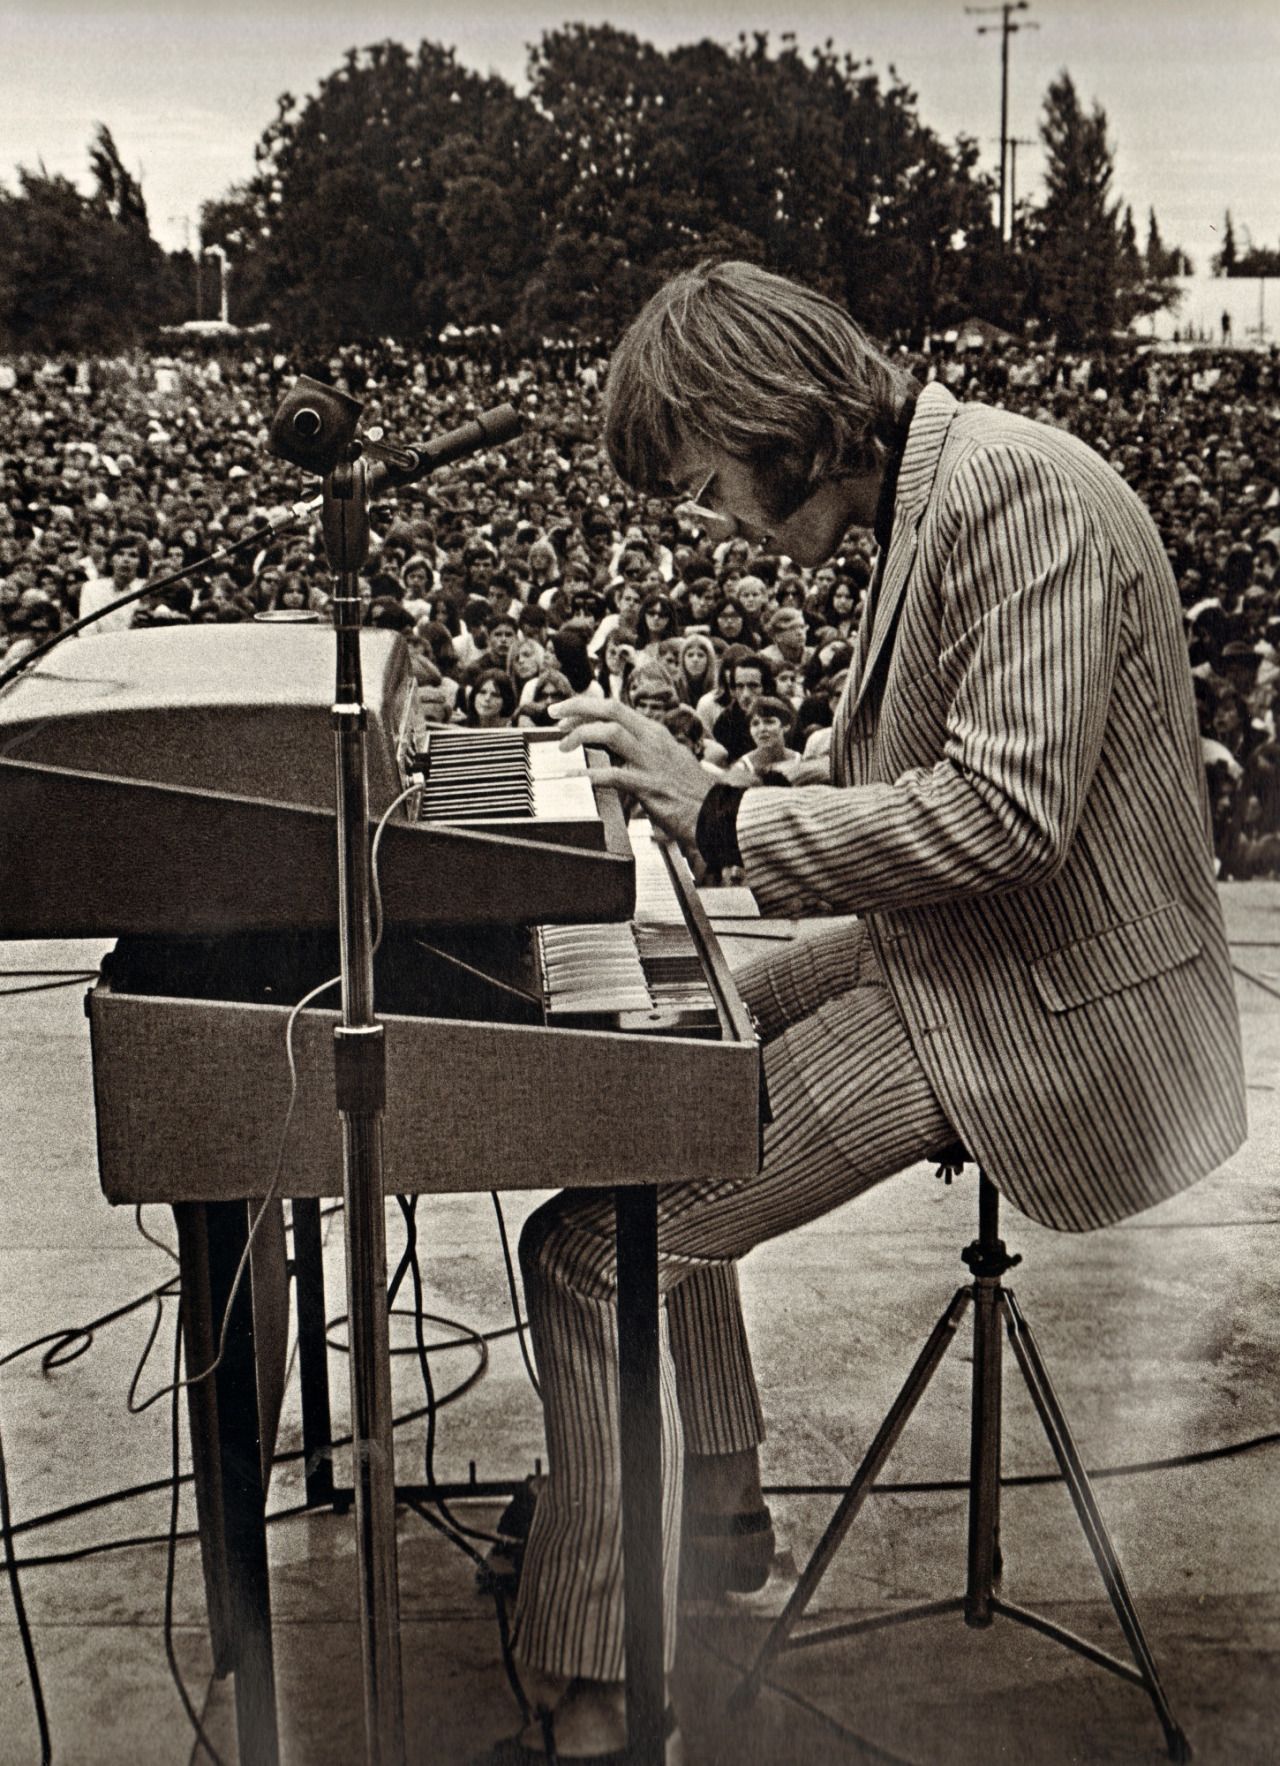 Doors' Founder Ray Manzarek Traveled to Germany for Special Cancer